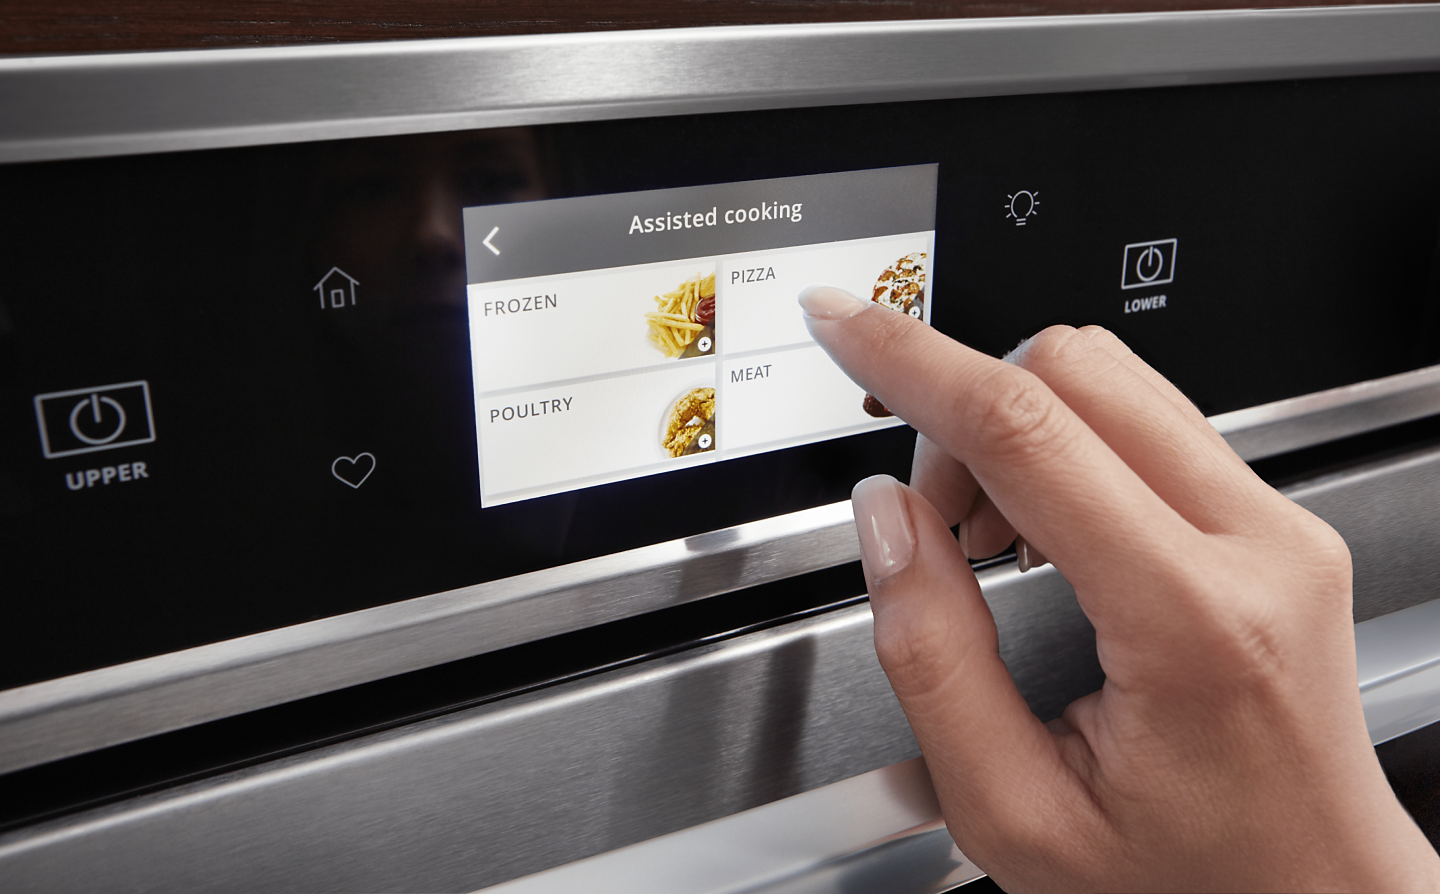 Selecting options on smart oven touchscreen